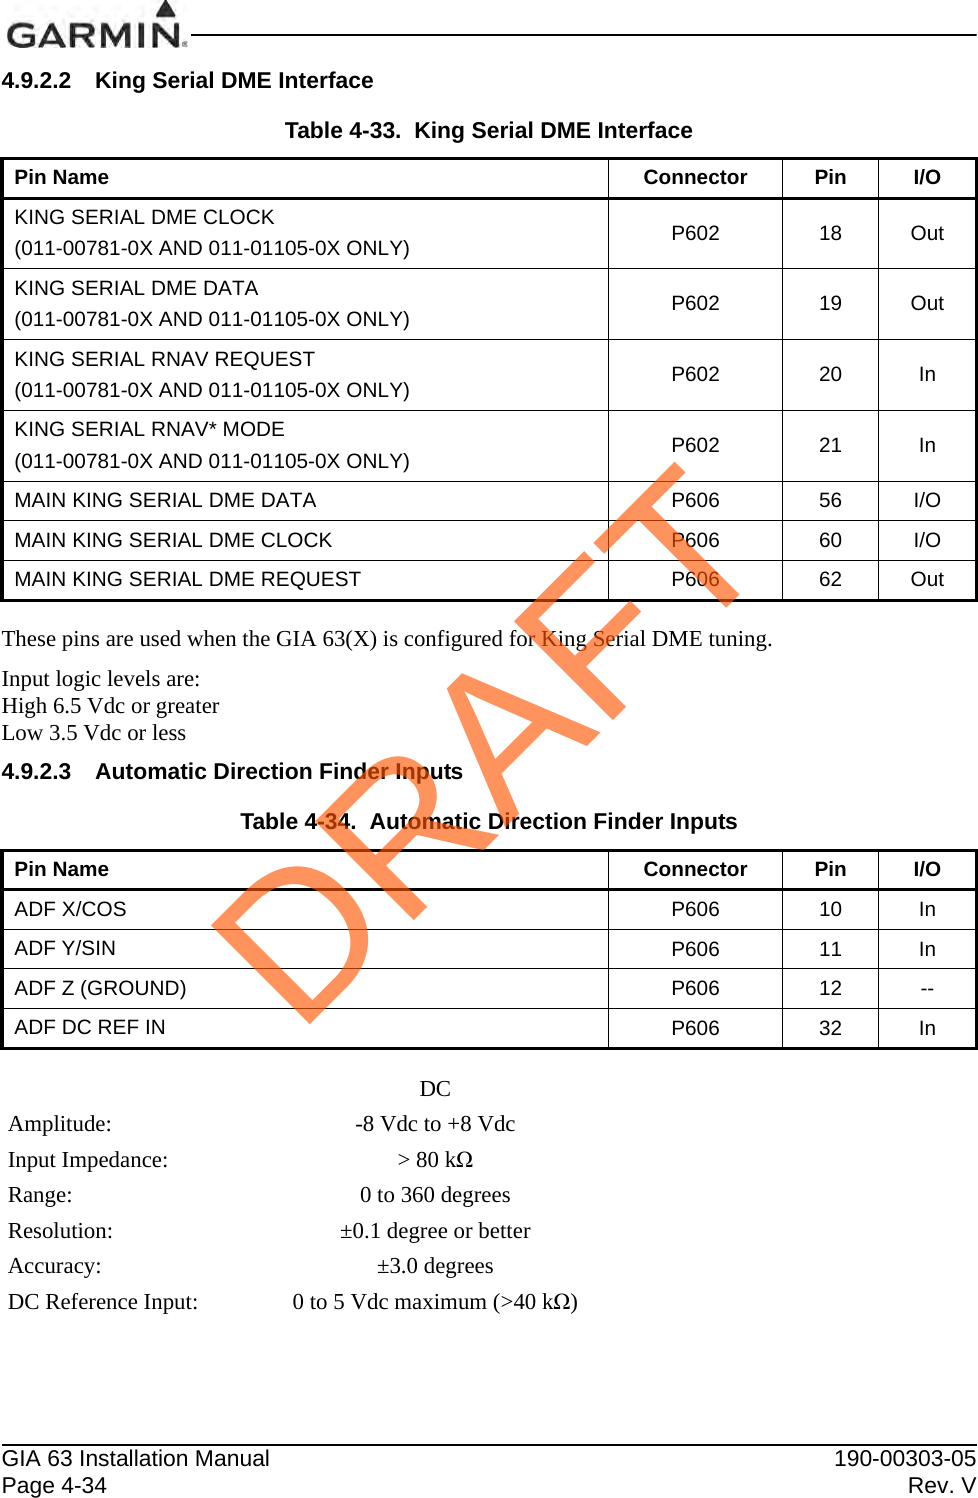 GIA 63 Installation Manual 190-00303-05Page 4-34 Rev. V4.9.2.2 King Serial DME InterfaceThese pins are used when the GIA 63(X) is configured for King Serial DME tuning.Input logic levels are:High 6.5 Vdc or greaterLow 3.5 Vdc or less4.9.2.3 Automatic Direction Finder InputsTable 4-33.  King Serial DME InterfacePin Name Connector Pin I/OKING SERIAL DME CLOCK(011-00781-0X AND 011-01105-0X ONLY) P602 18 OutKING SERIAL DME DATA(011-00781-0X AND 011-01105-0X ONLY) P602 19 OutKING SERIAL RNAV REQUEST(011-00781-0X AND 011-01105-0X ONLY) P602 20 InKING SERIAL RNAV* MODE(011-00781-0X AND 011-01105-0X ONLY) P602 21 InMAIN KING SERIAL DME DATA P606 56 I/OMAIN KING SERIAL DME CLOCK P606 60 I/OMAIN KING SERIAL DME REQUEST P606 62 OutTable 4-34.  Automatic Direction Finder InputsPin Name Connector Pin I/OADF X/COS P606 10 InADF Y/SIN P606 11 InADF Z (GROUND) P606 12 --ADF DC REF IN P606 32 InDCAmplitude: -8 Vdc to +8 VdcInput Impedance: &gt; 80 kΩRange: 0 to 360 degreesResolution: ±0.1 degree or betterAccuracy: ±3.0 degreesDC Reference Input: 0 to 5 Vdc maximum (&gt;40 kΩ)DRAFT